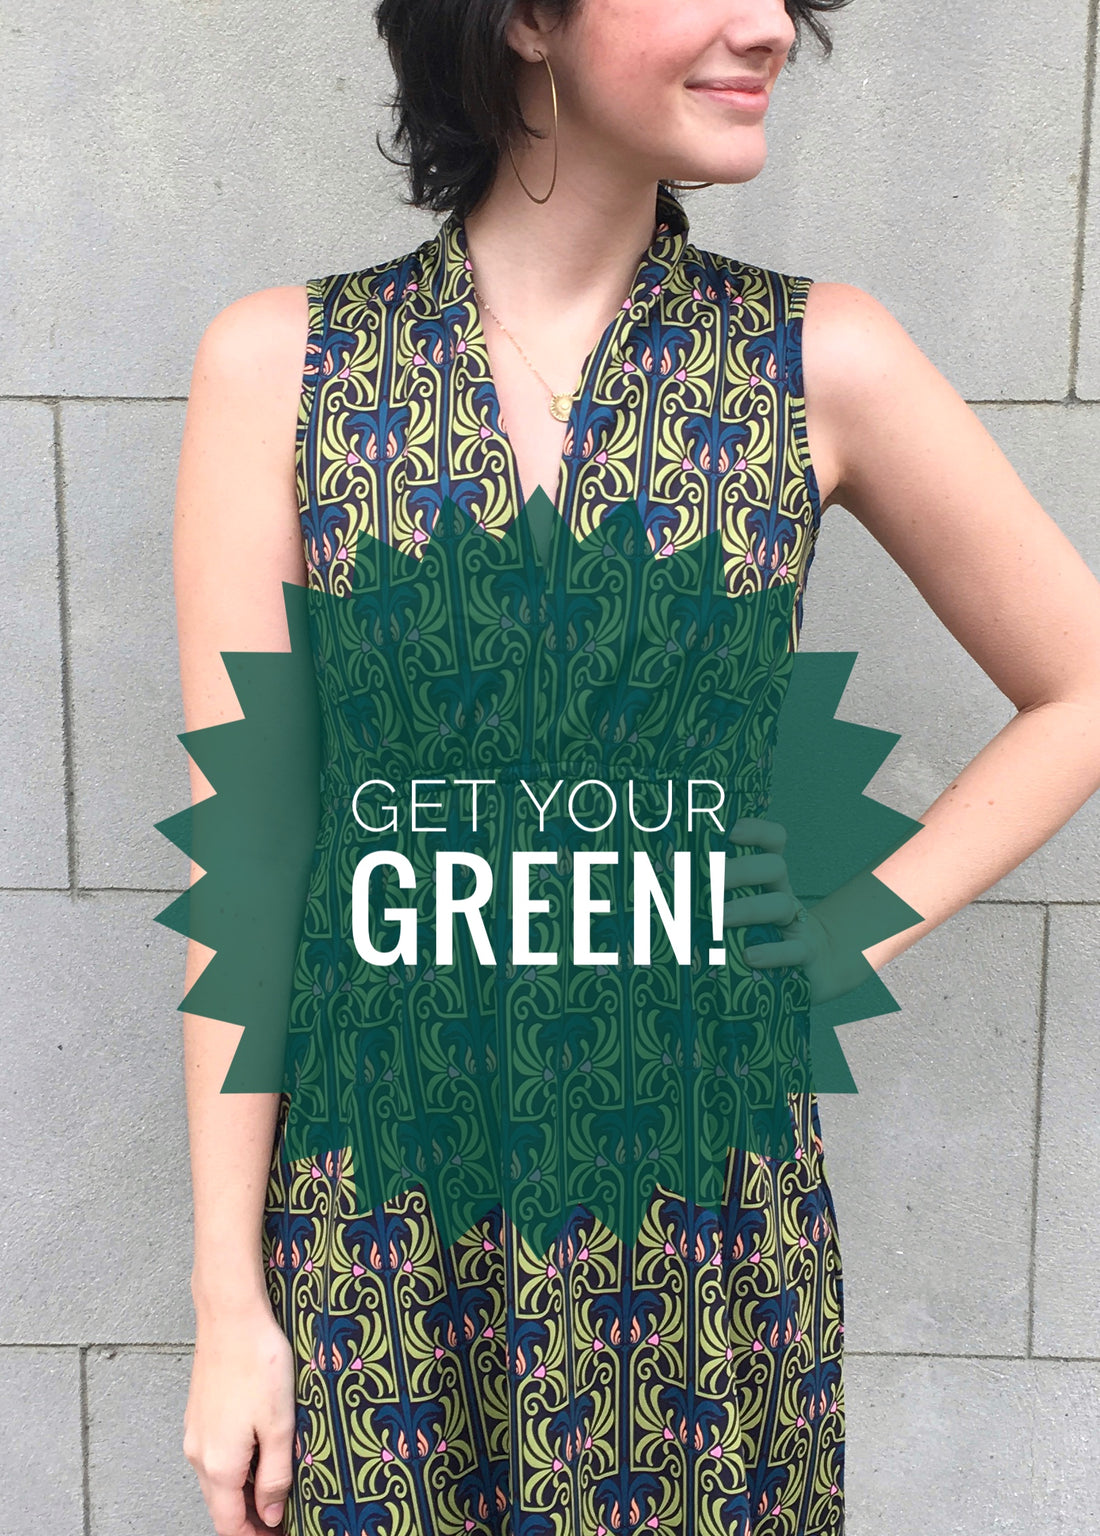 Get Your Green!